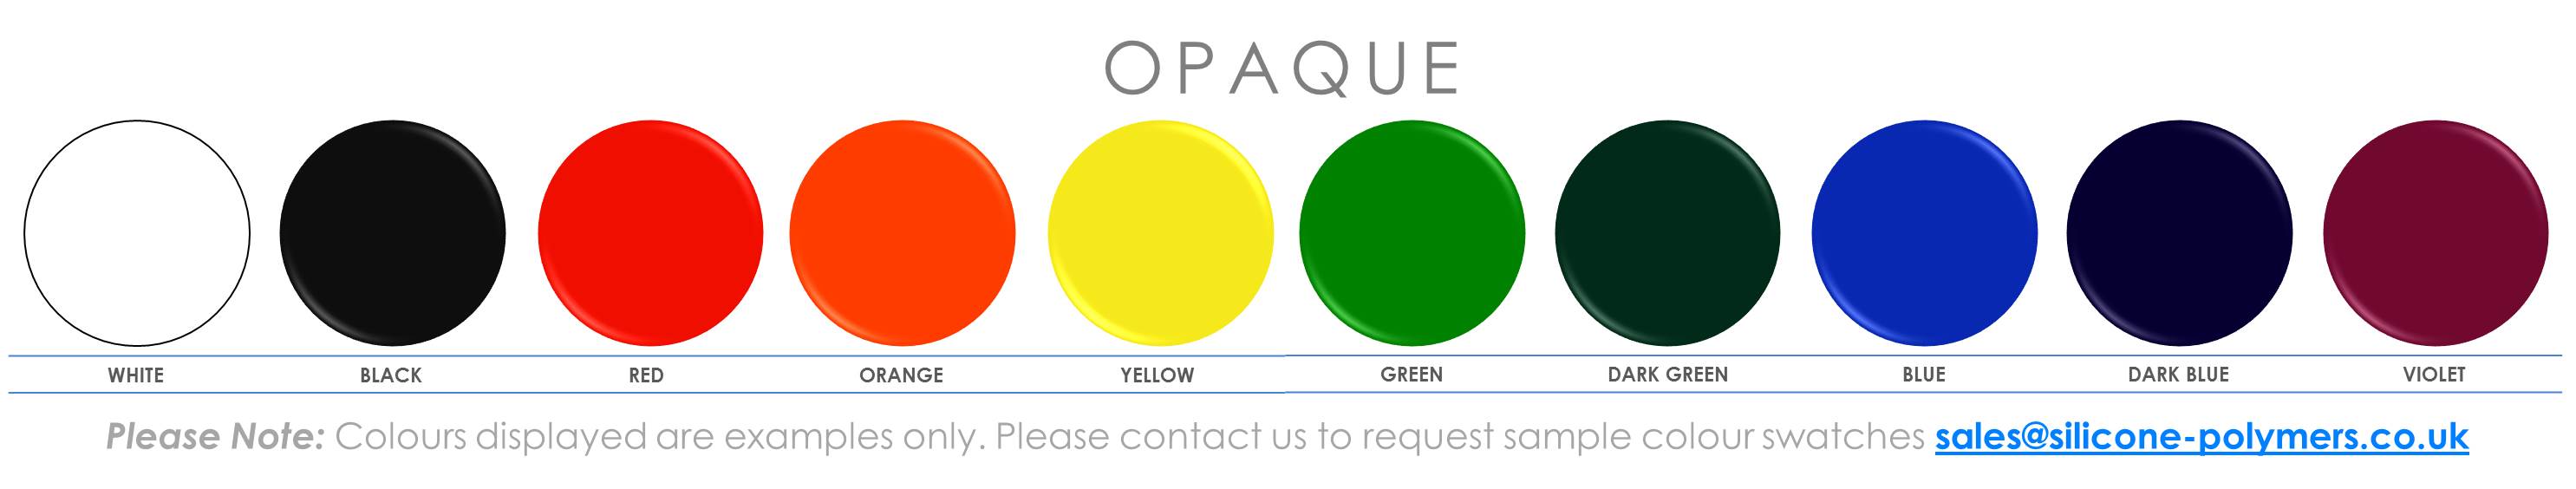 Opaque and Translucent Colour Swatches